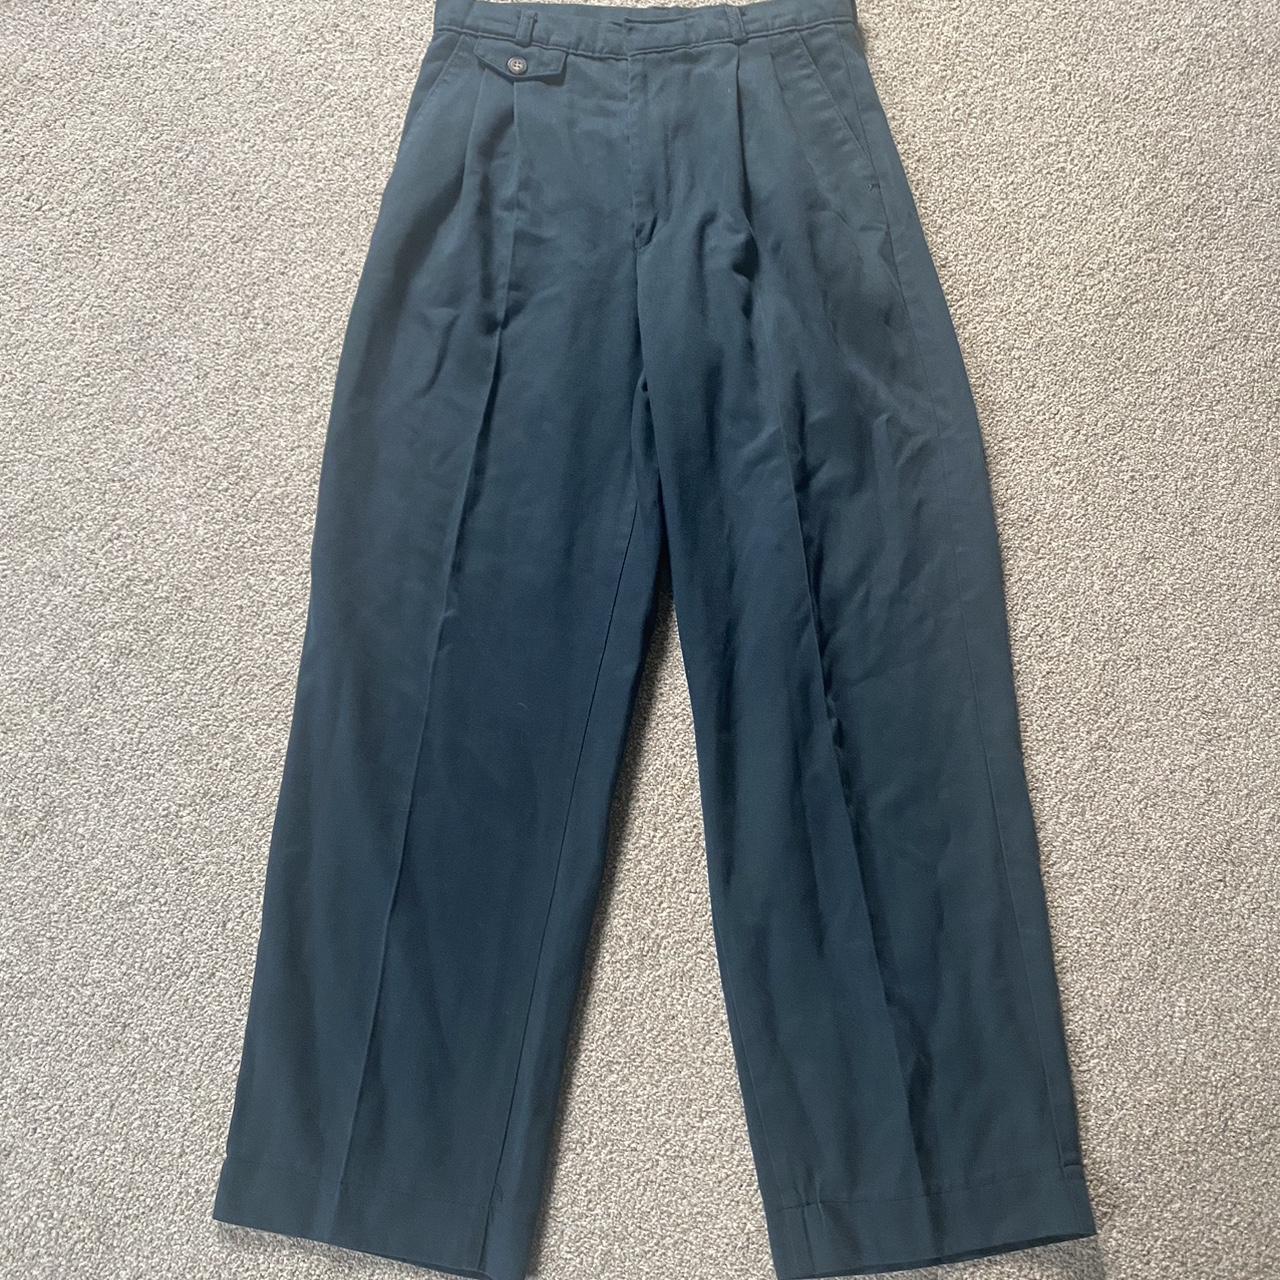 Vintage trousers in amazing condition from the 90s - Depop